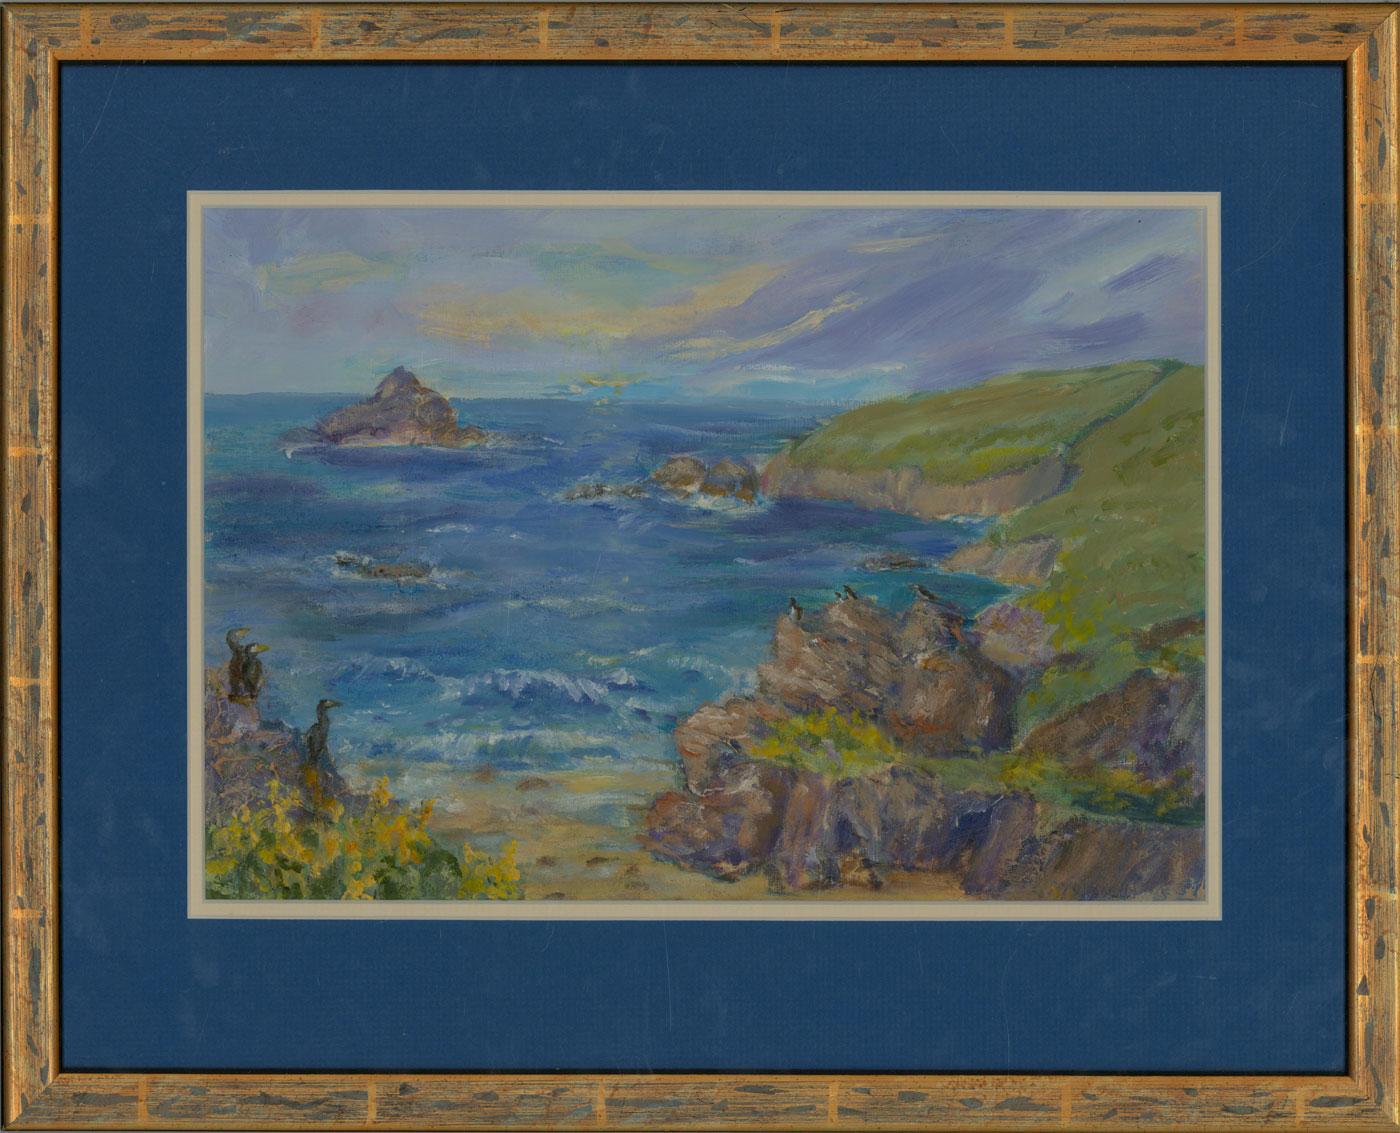 A fine oil painting with areas of impasto, depicting a vibrant coastal scene. Signed indistinctly and possibly dated '2015' to the lower right-hand corner. Well-presented in a double card mount and in a distressed gilt effect frame, as shown. On